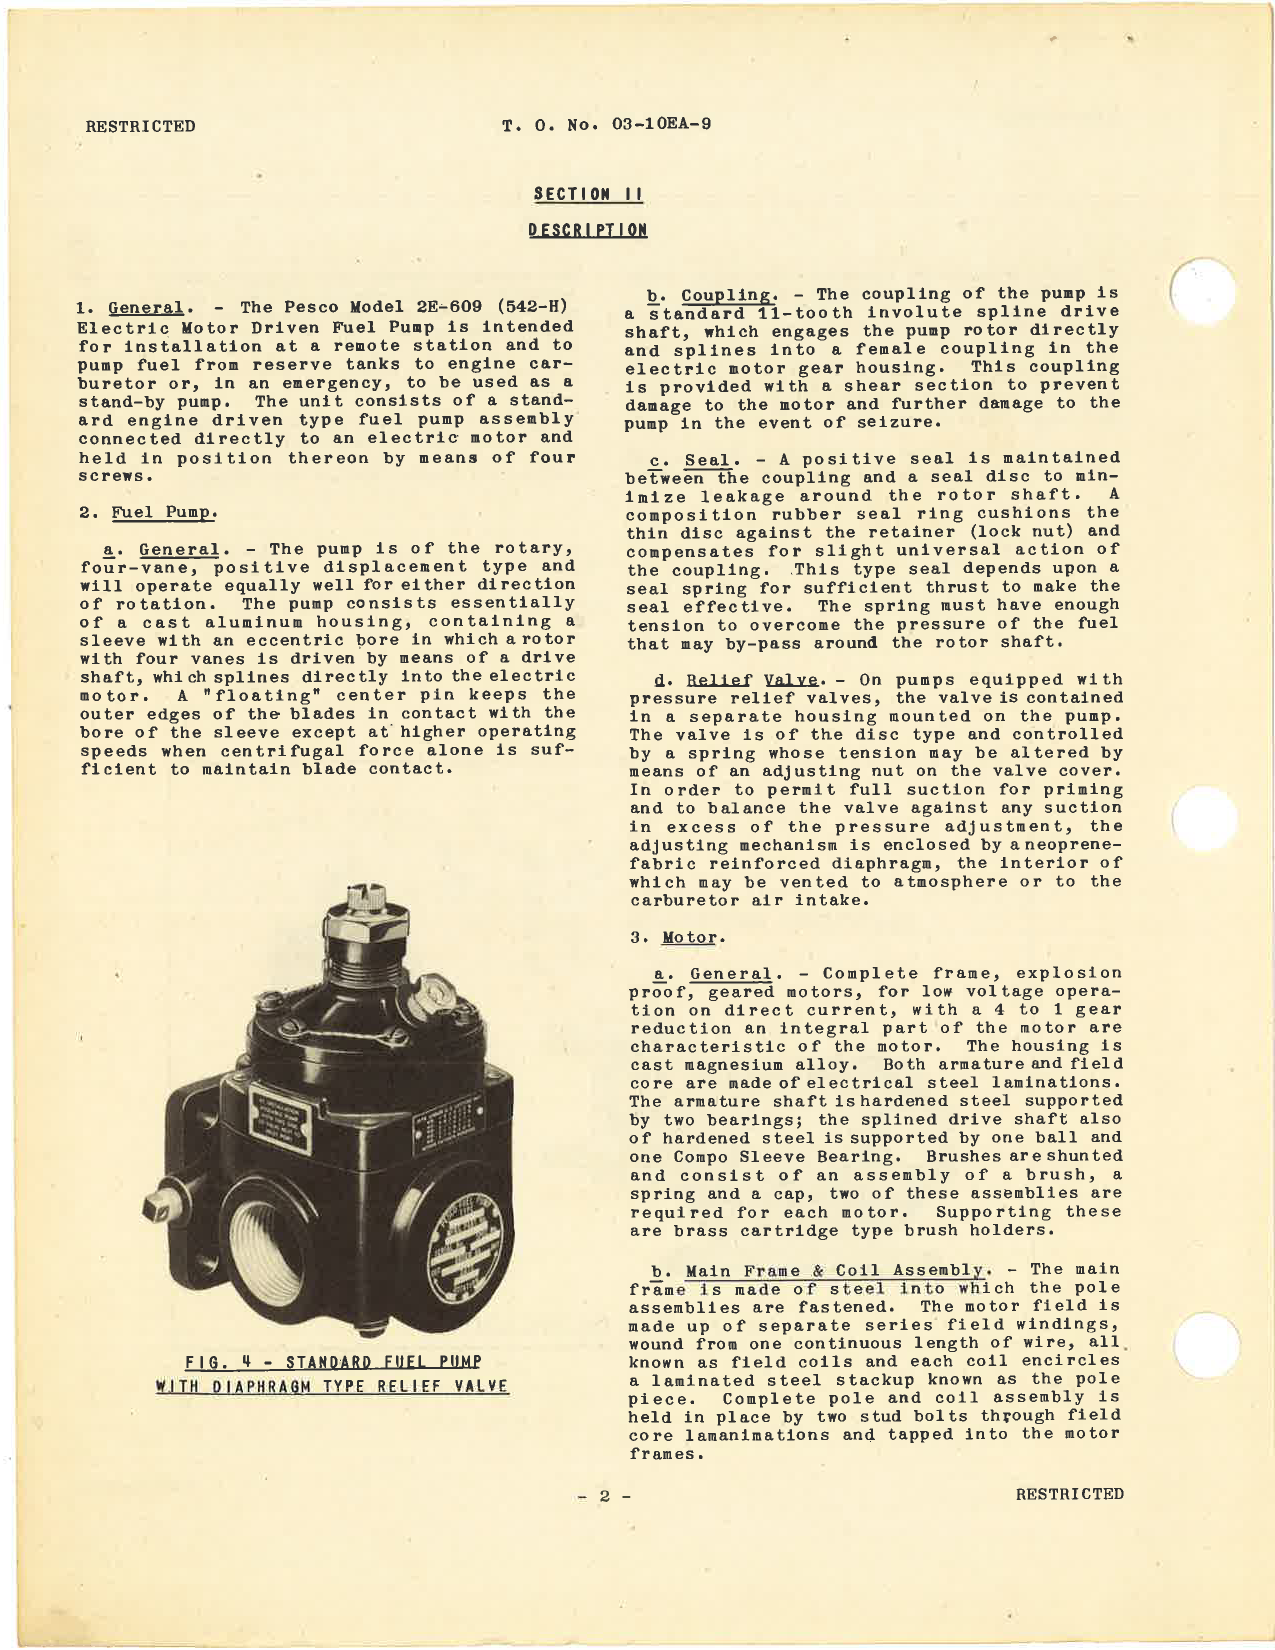 Sample page 8 from AirCorps Library document: Handbook of Instructions with Parts Catalog for Electric Motor Driven Fuel Pumps